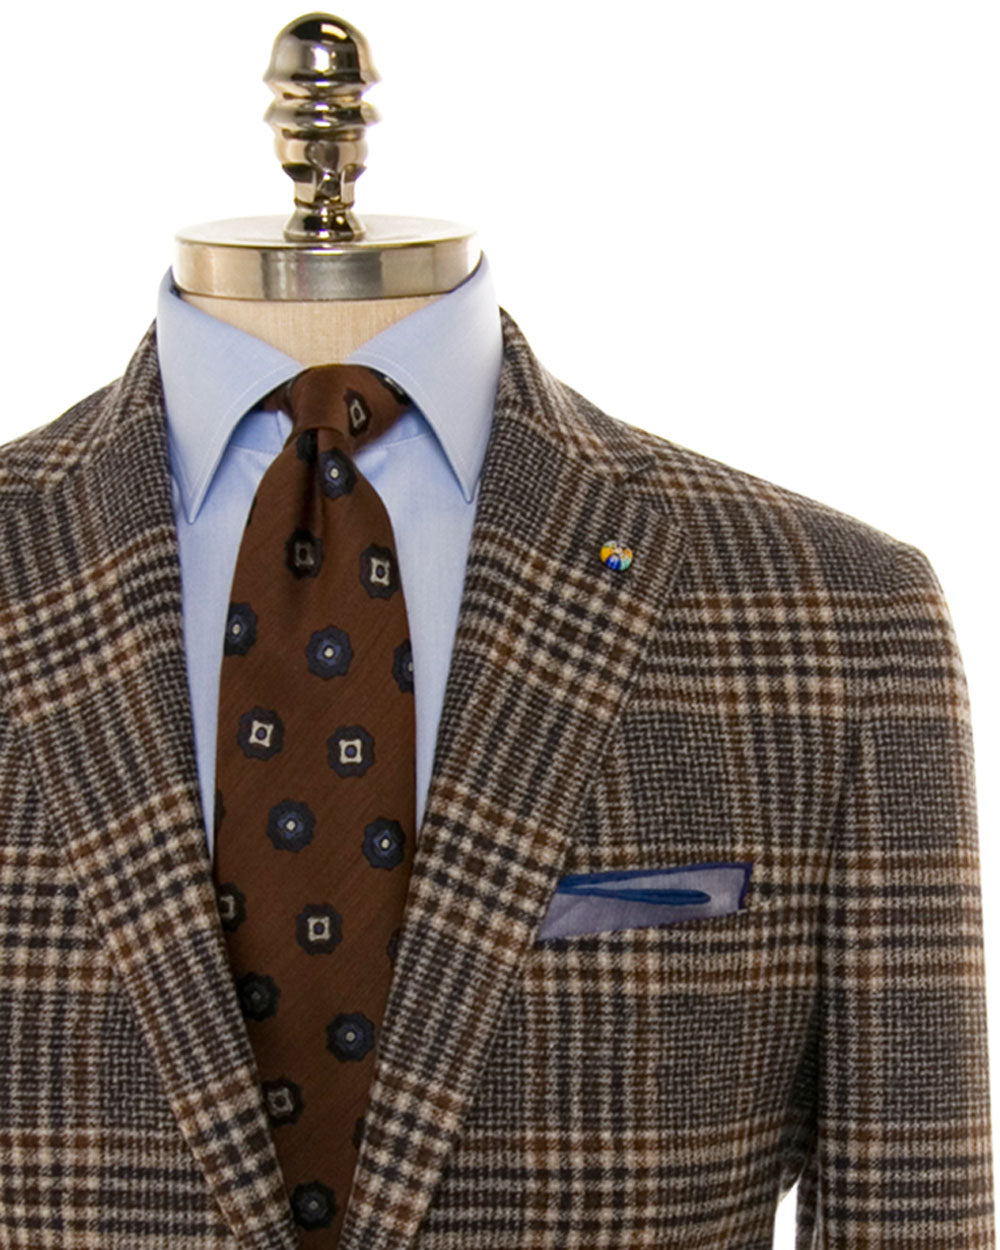 Brown and Navy Deconstructed Sportcoat